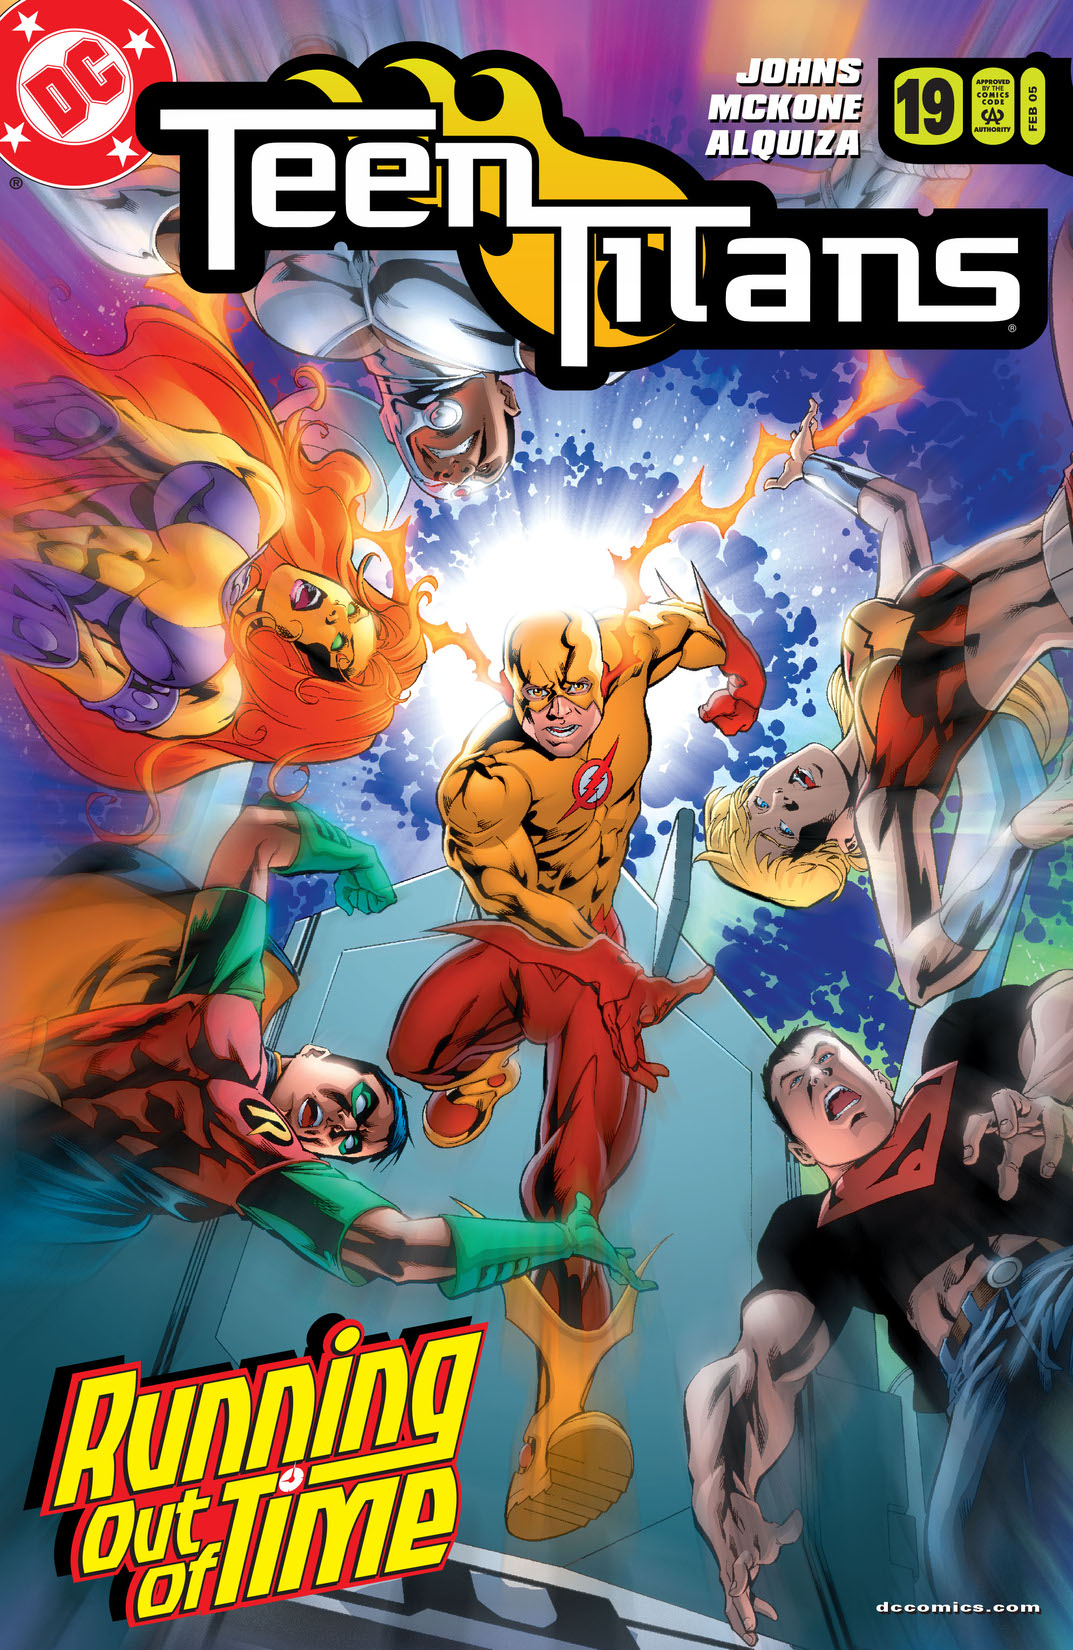 Teen Titans (2003-) #19 preview images